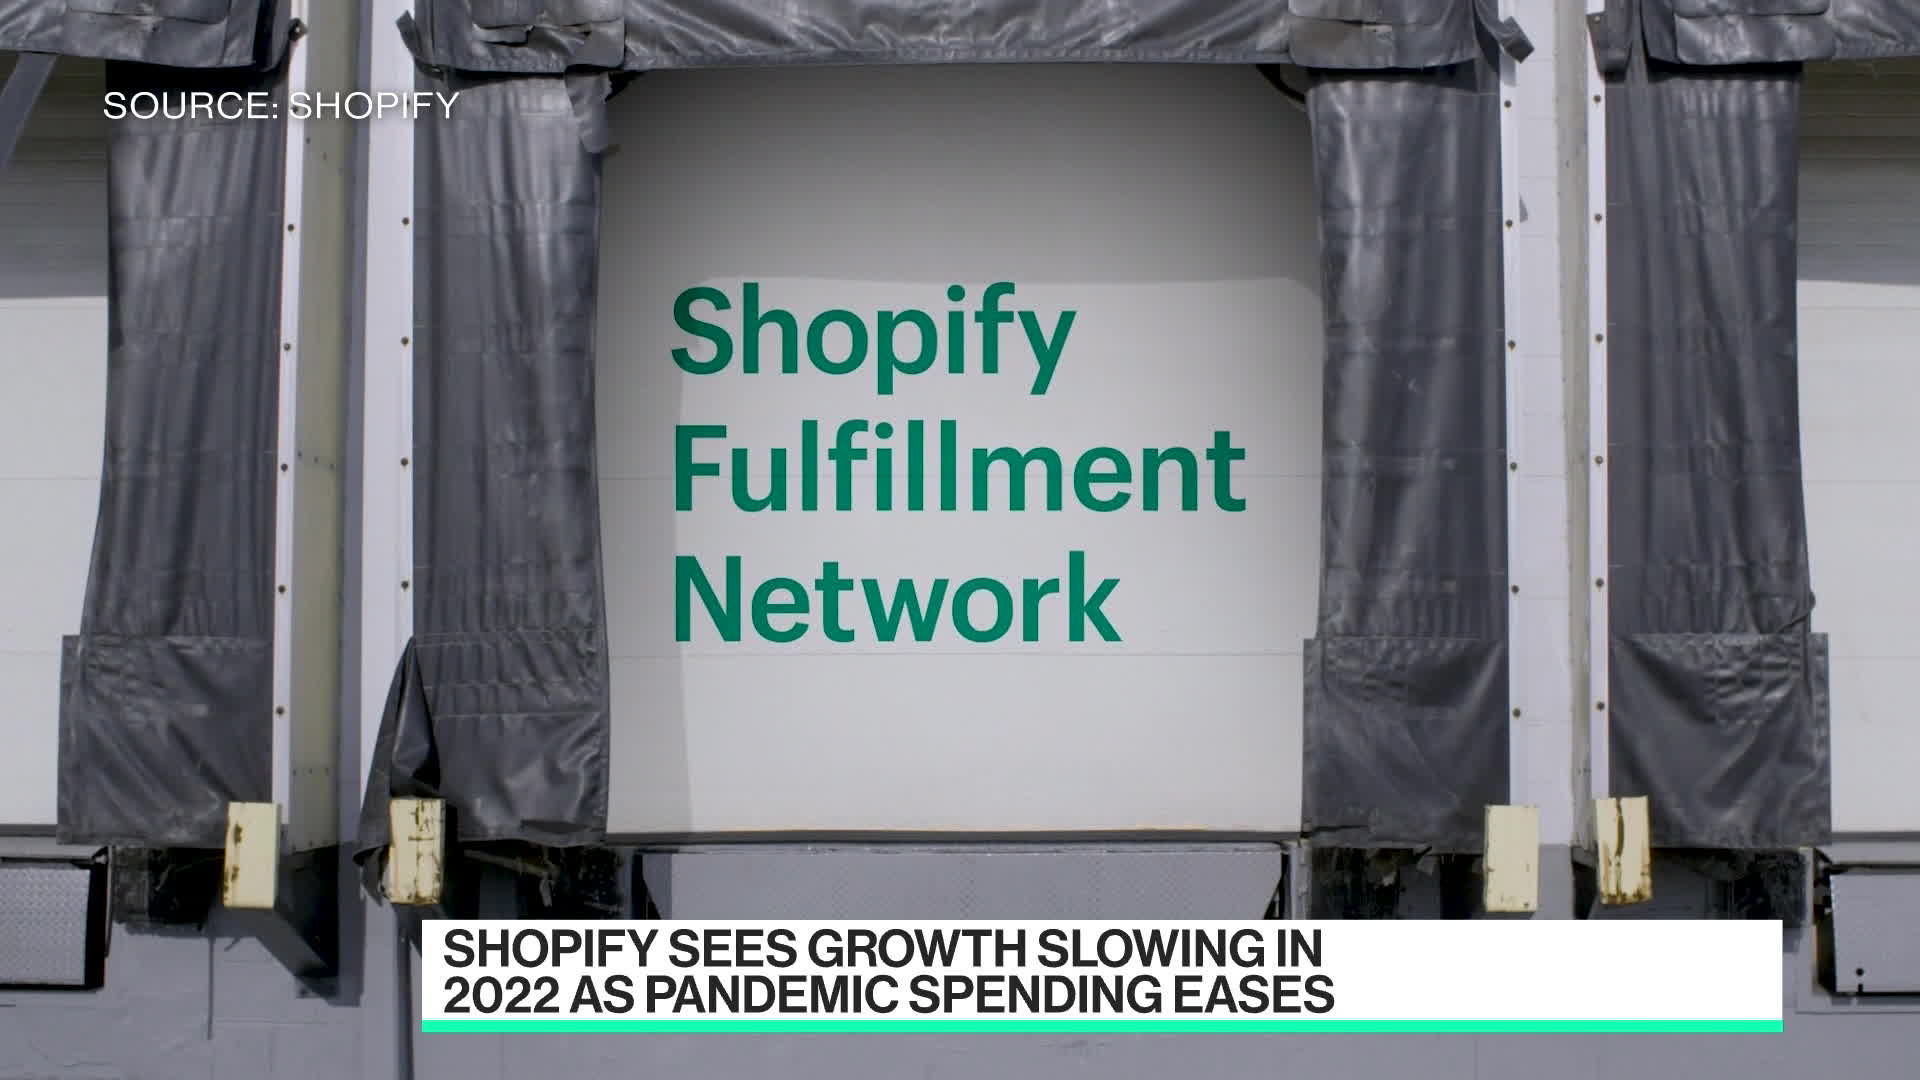 Shopify CEO on Earnings, Future Outlook